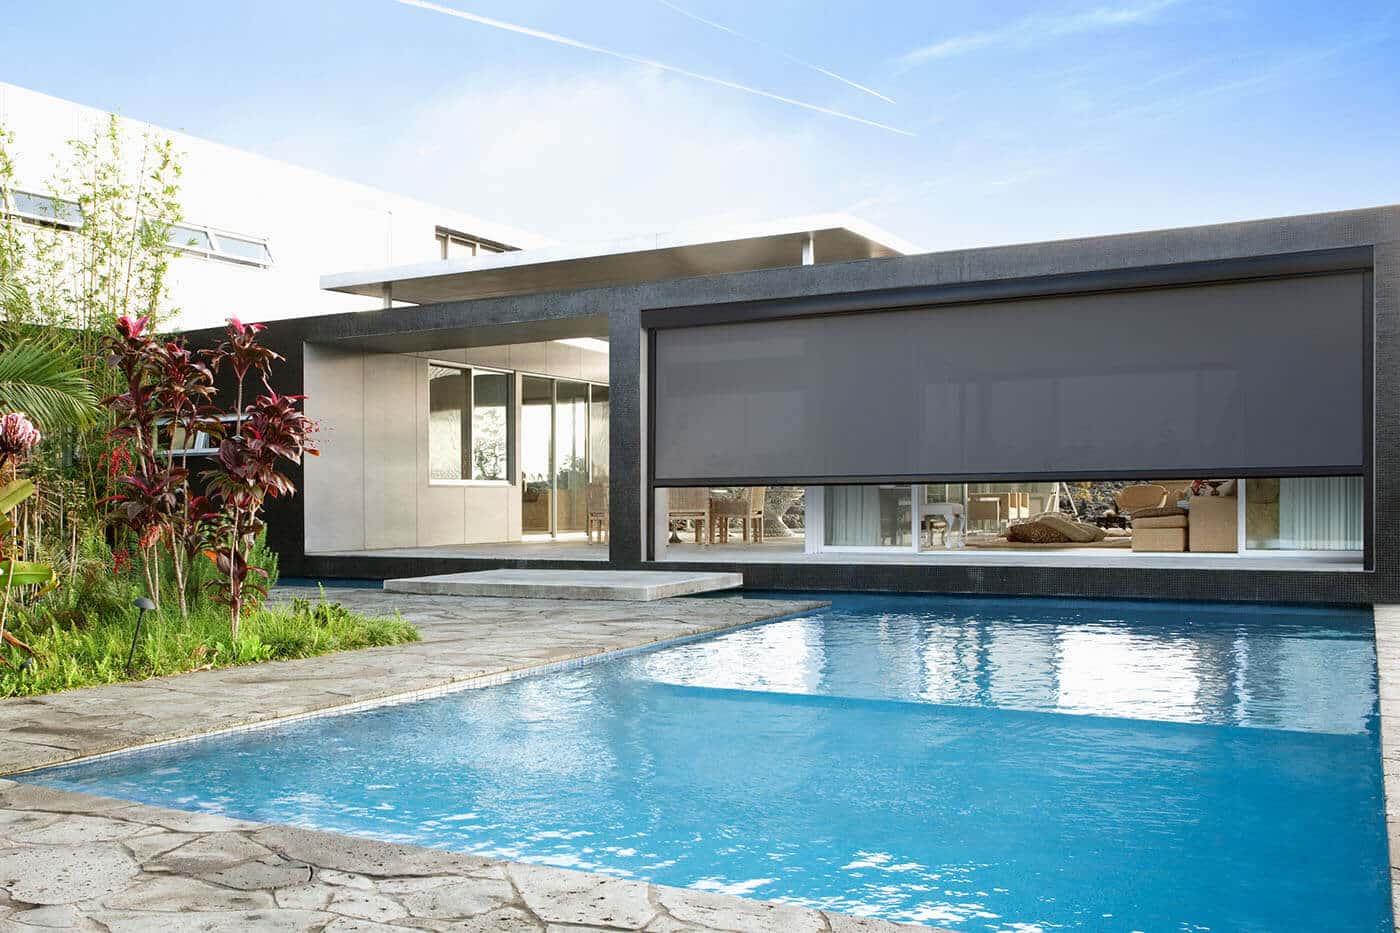 Modern luxurious home with swimming pool, featuring dark grey Evo Magnatrack Awnings by Luxaflex installed at the patio.